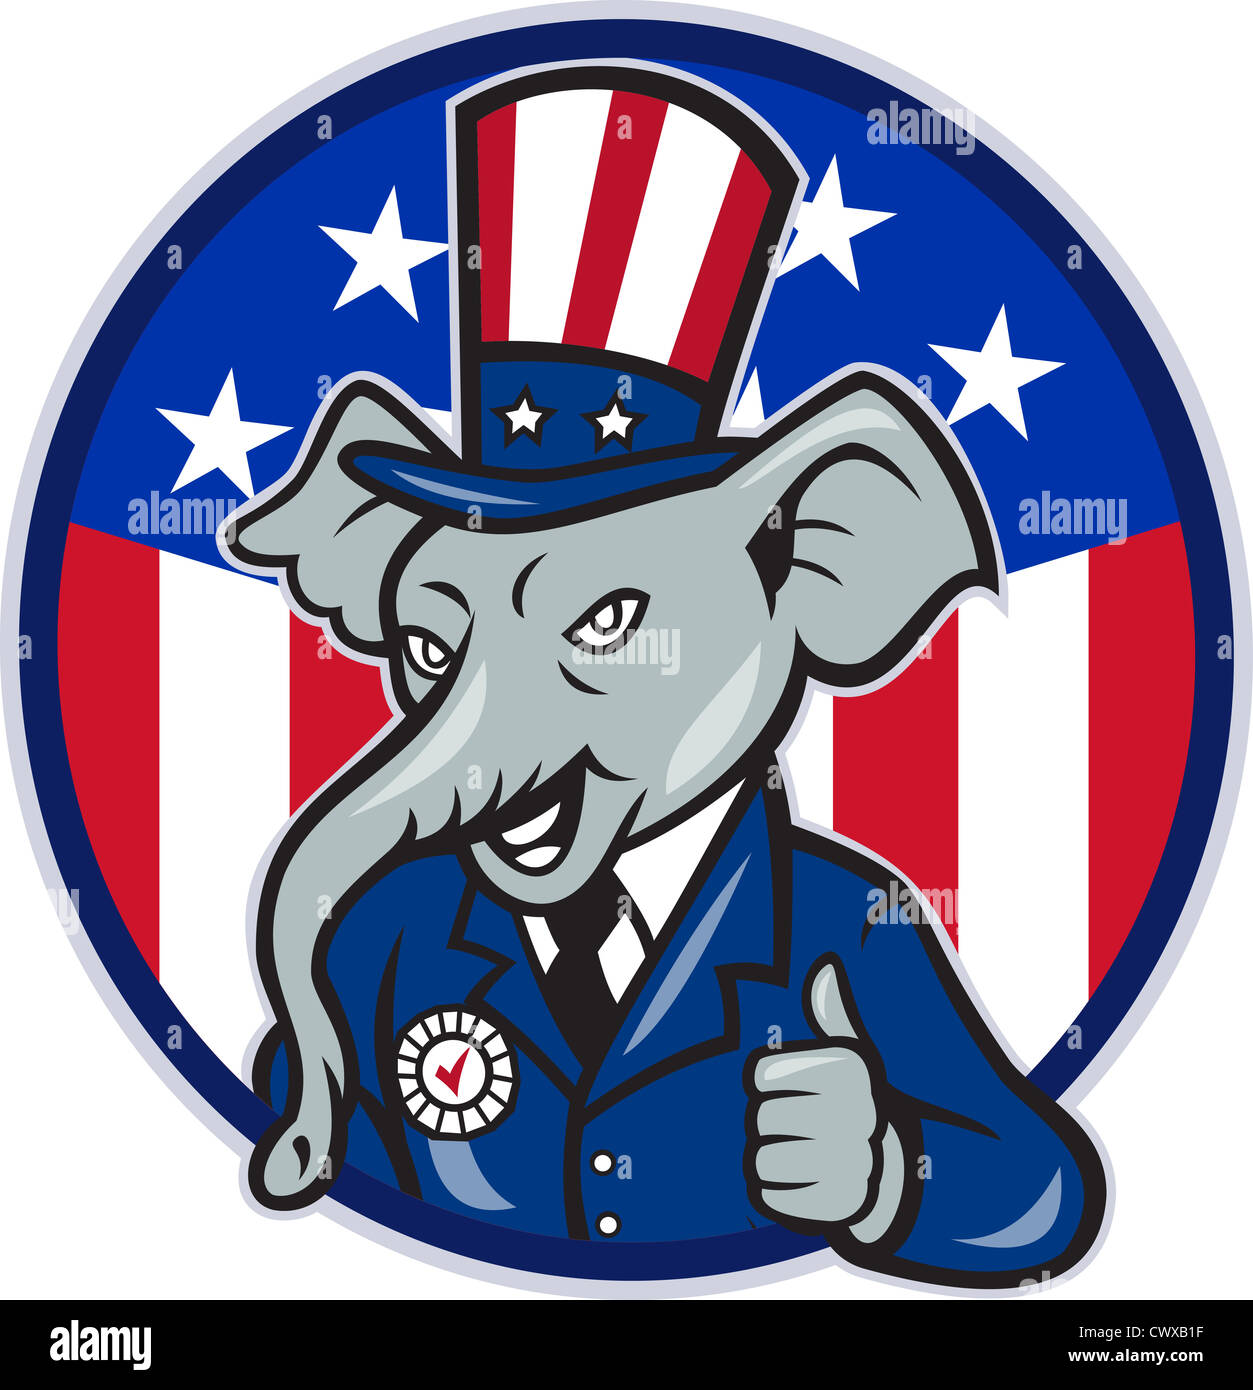 Illustration of a republican elephant mascot of the republican grand old party gop wearing hat and suit thumbs up Stock Photo